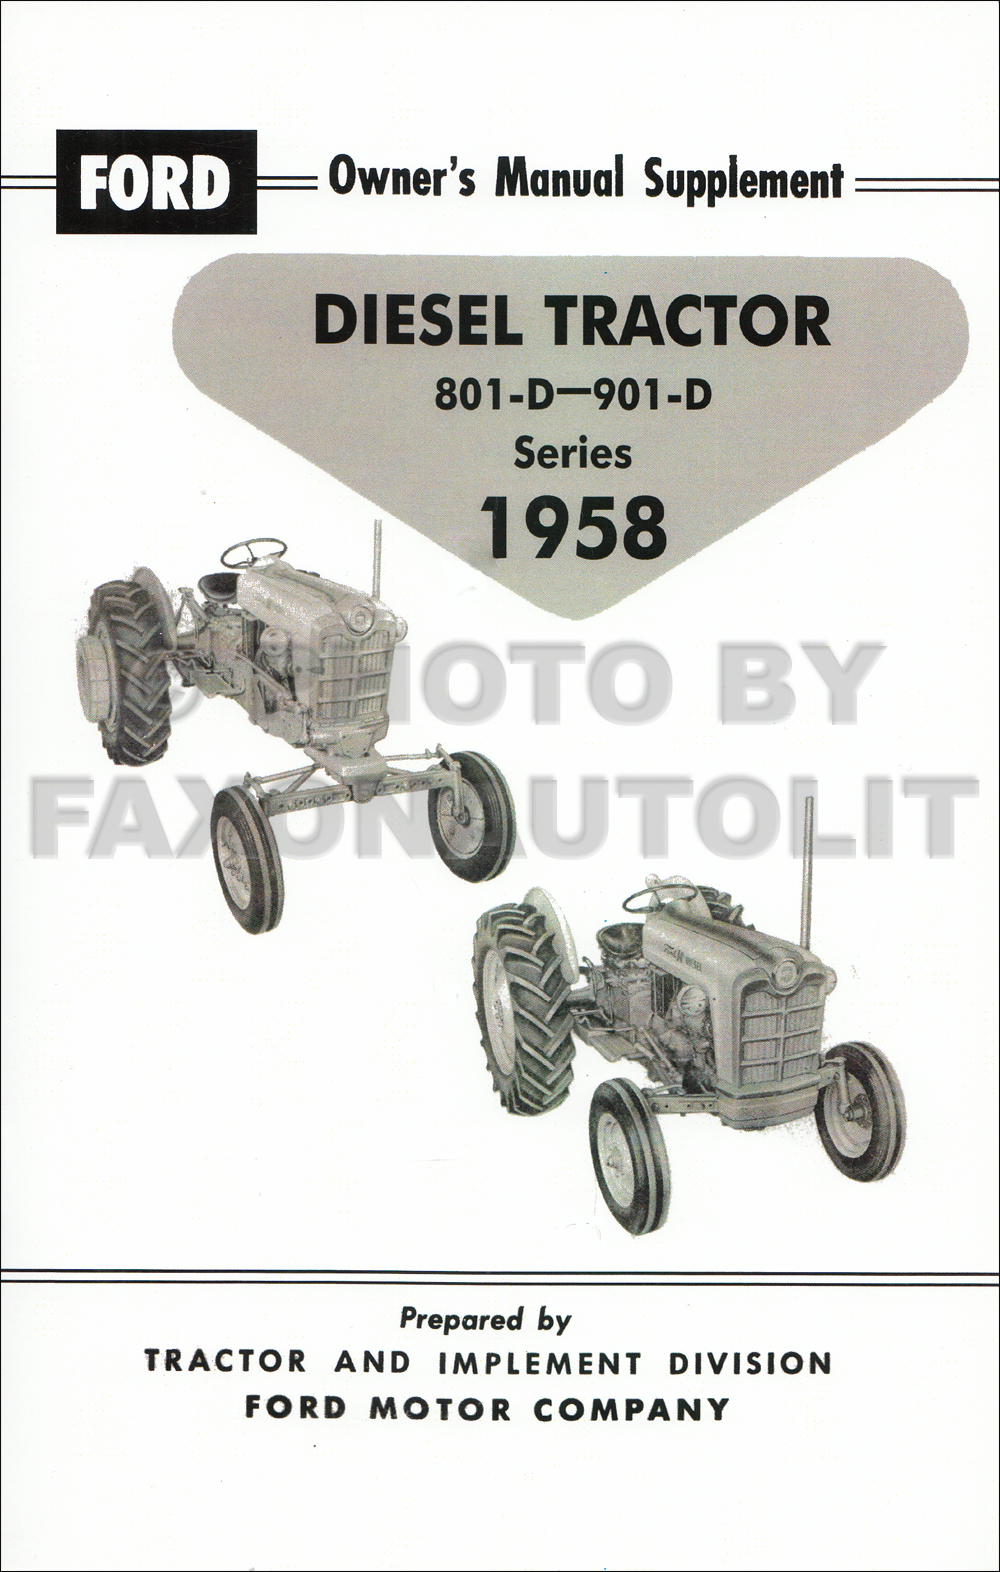 1958-1962 Ford 801-D/901-D Diesel Engine Tractor Owners Handbook Supplement Reprint